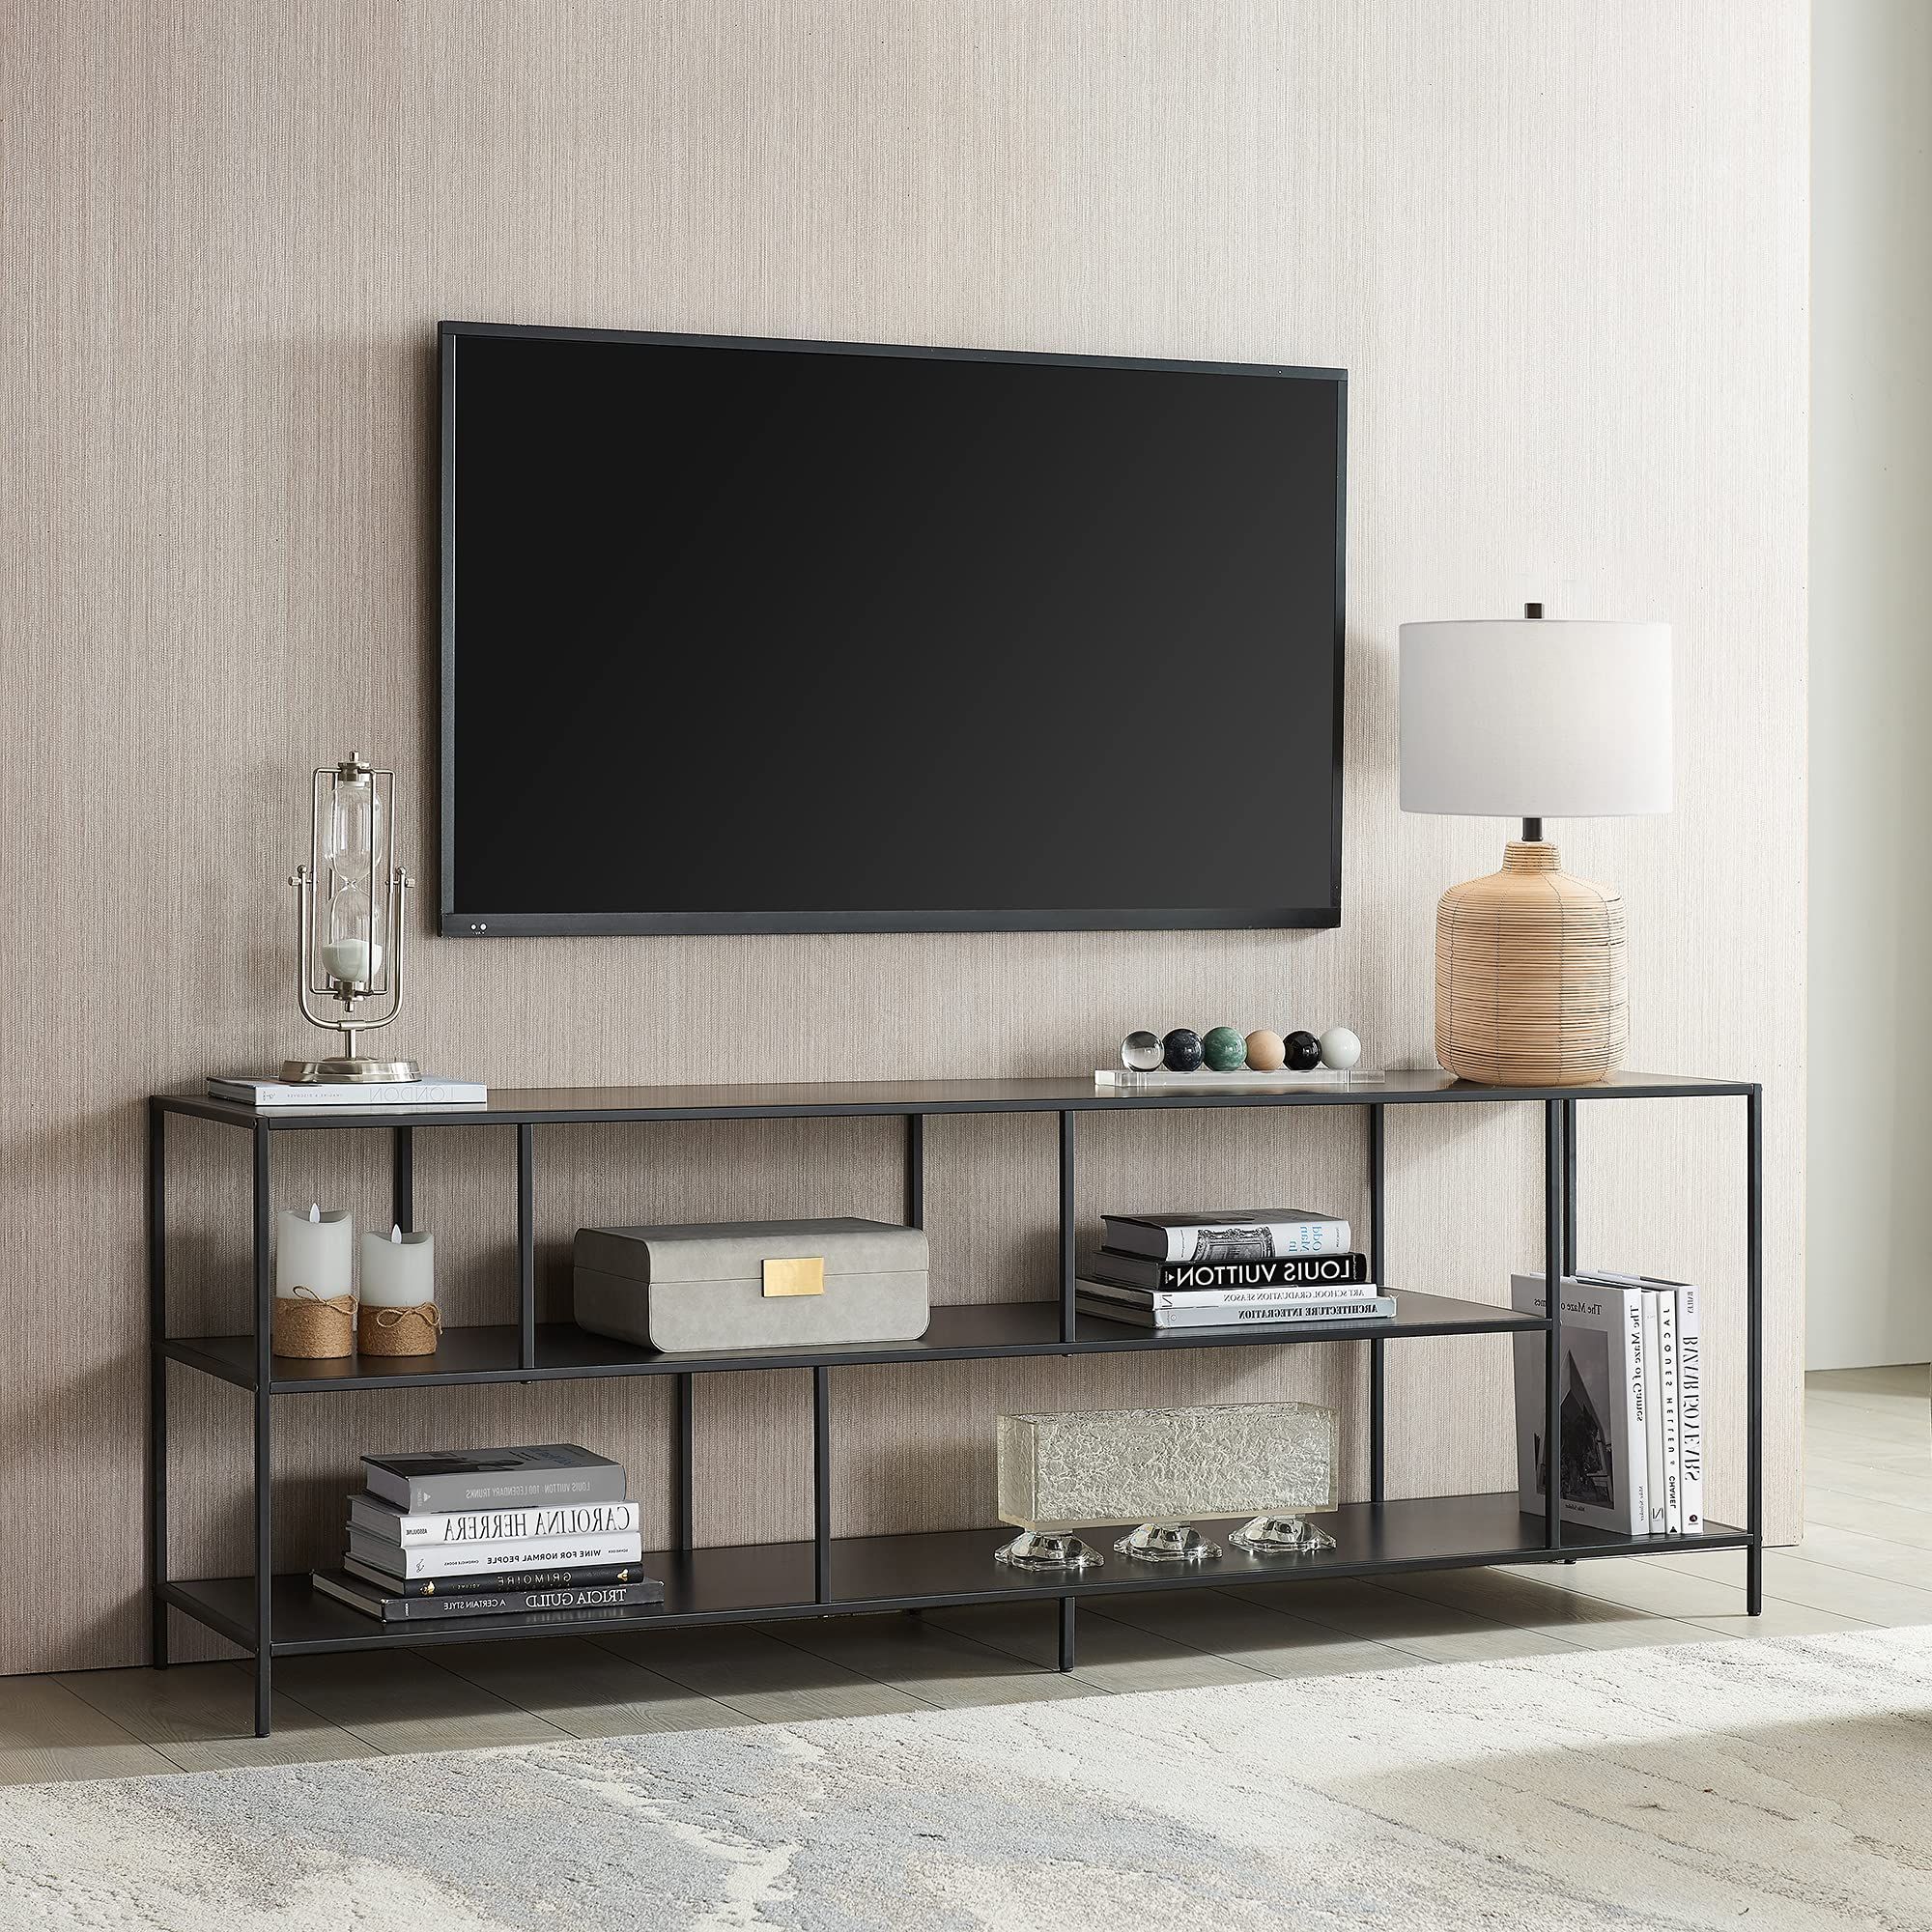 Most Recent Amazon: Winthrop Rectangular Tv Stand With Metal Shelves For Tv's Up To  80" In Blackened Bronze : Home & Kitchen Throughout Bronze Metal Tv Stands (View 2 of 10)